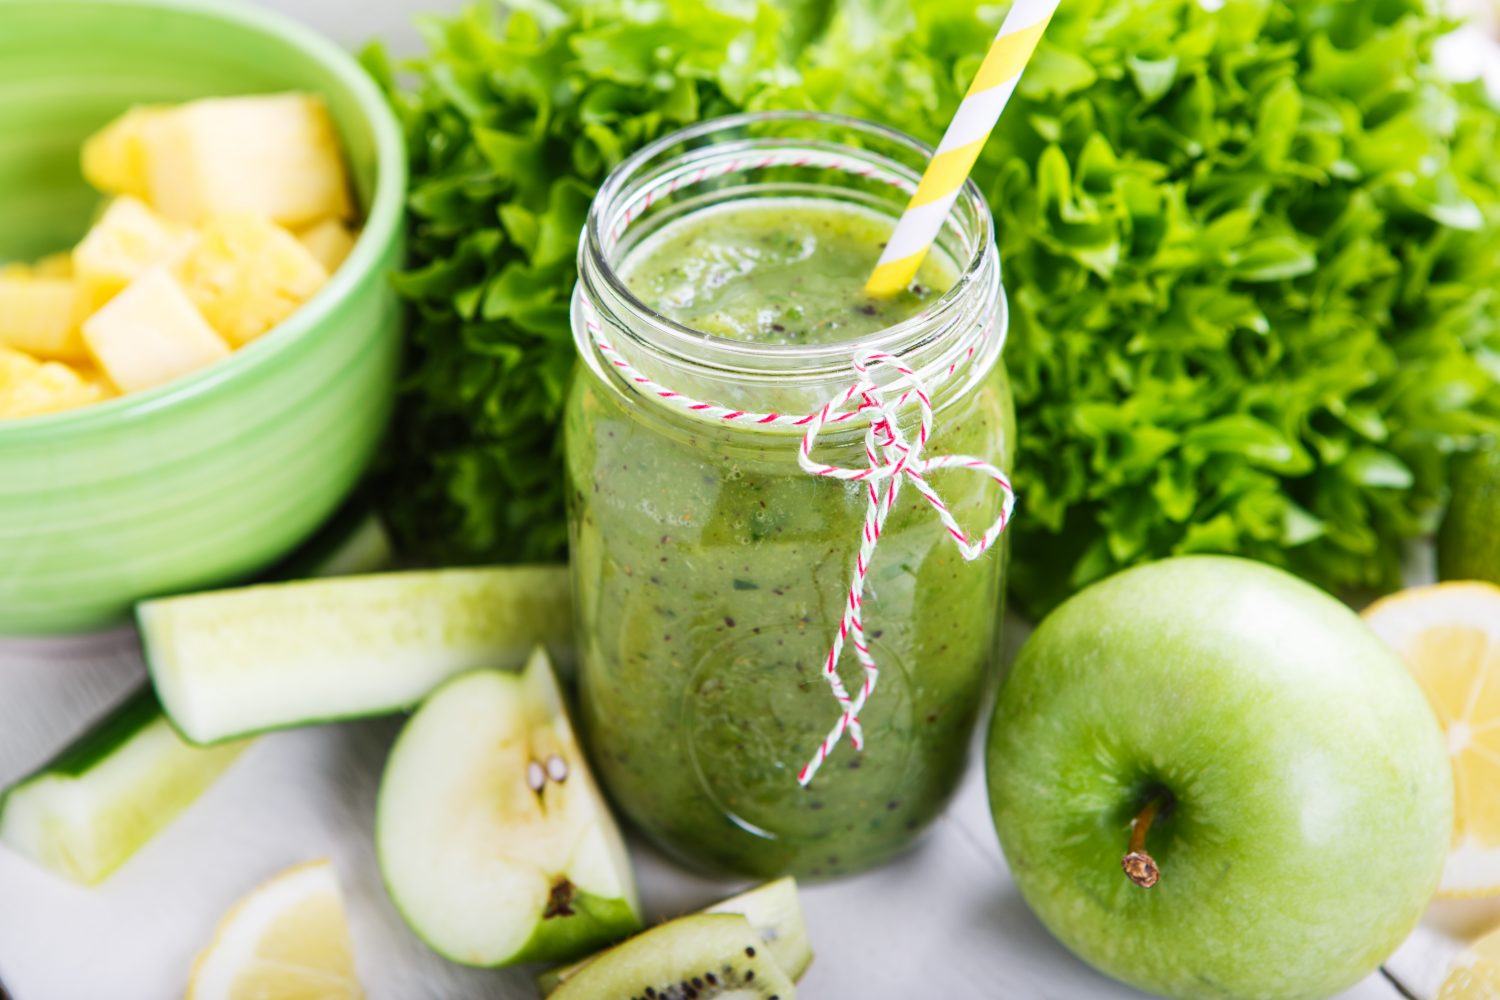 Green Smoothies – First Step To Start Turning Your Health Around